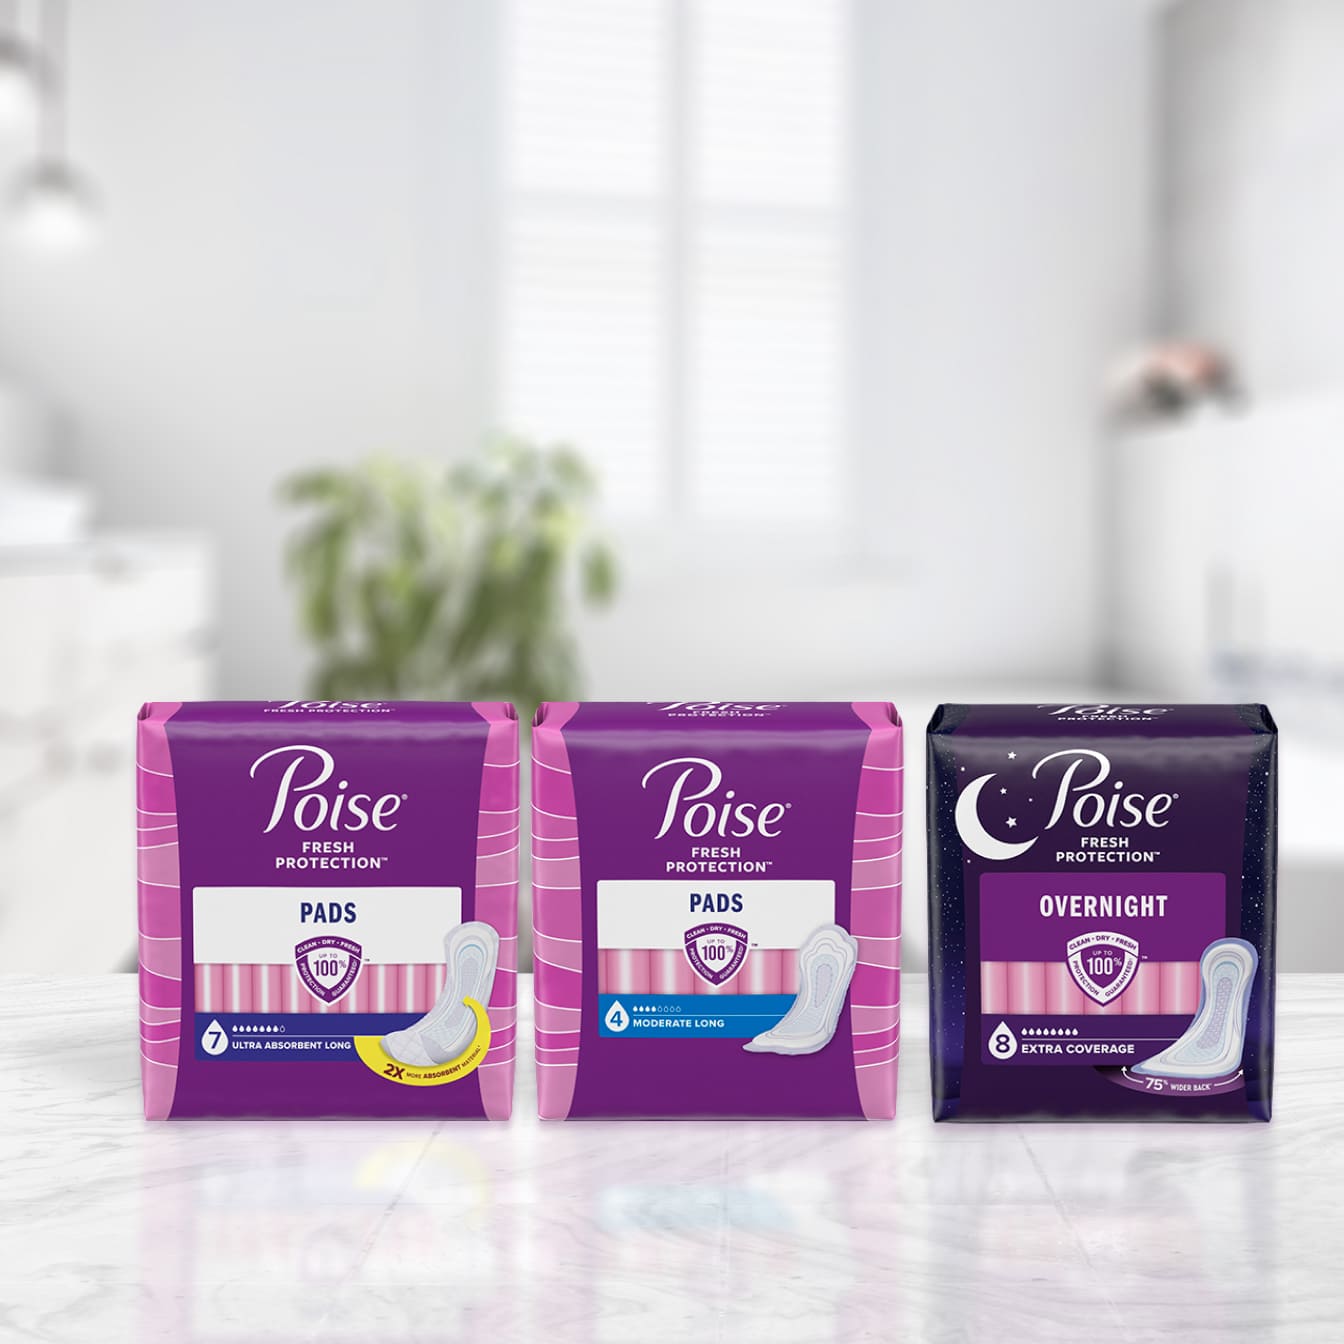 Depend, Poise unveil new women's incontinence products